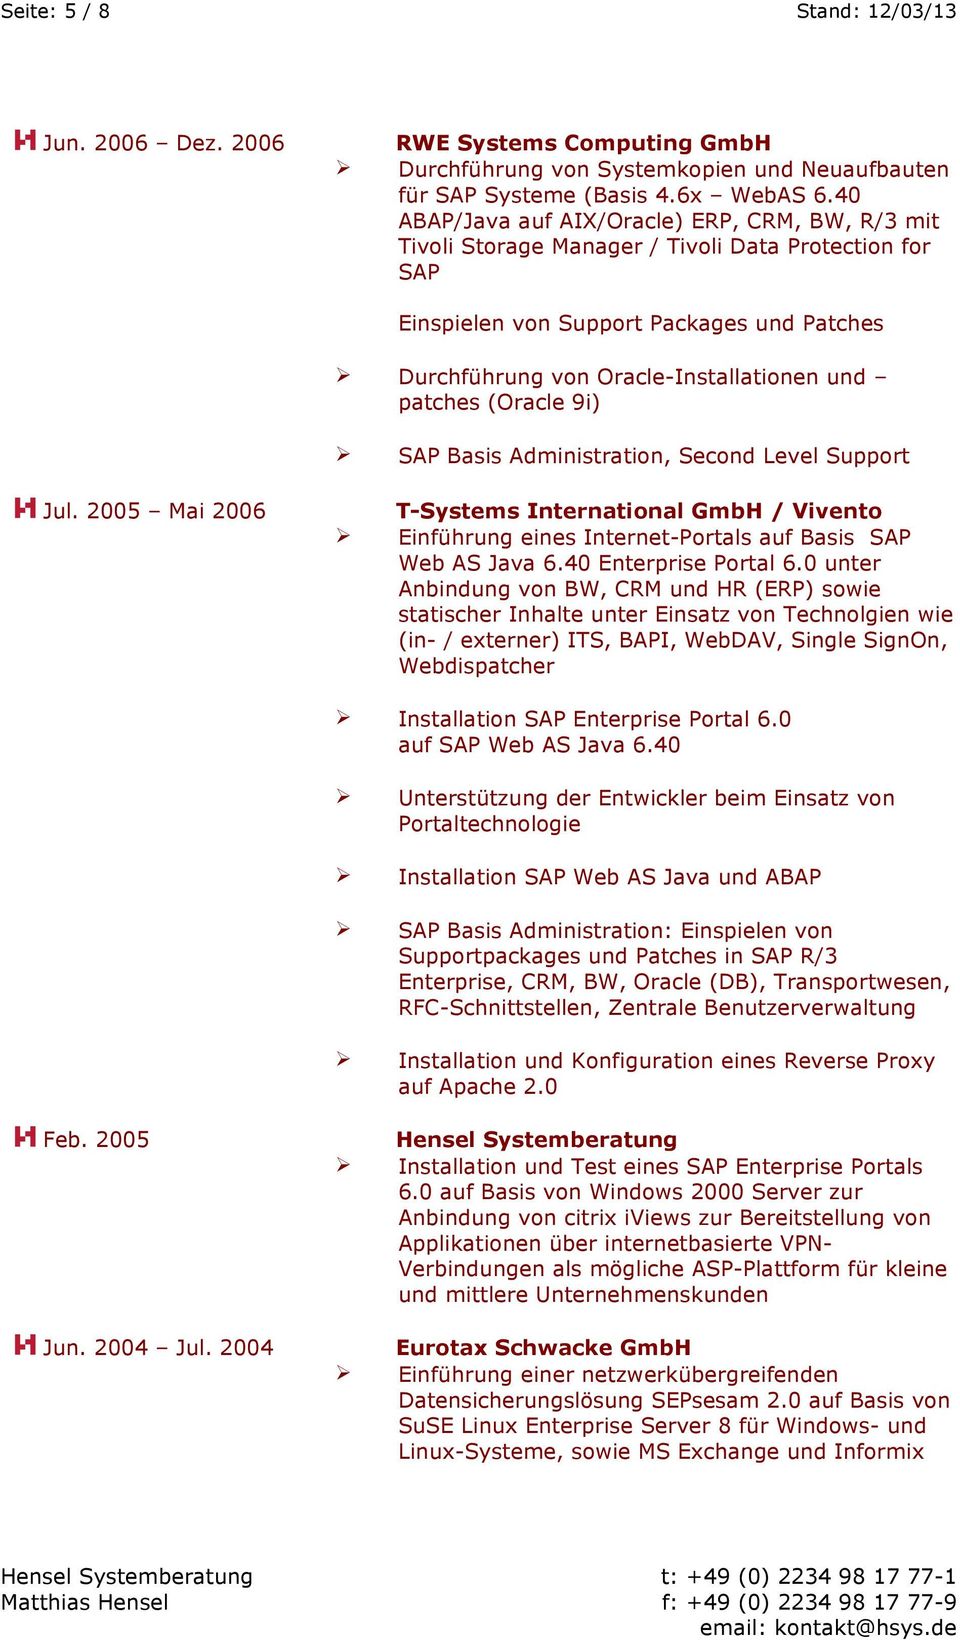 patches (Oracle 9i) Jul. 2005 Mai 2006 SAP Basis Administration, Second Level Support T-Systems International GmbH / Vivento Einführung eines Internet-Portals auf Basis SAP Web AS Java 6.